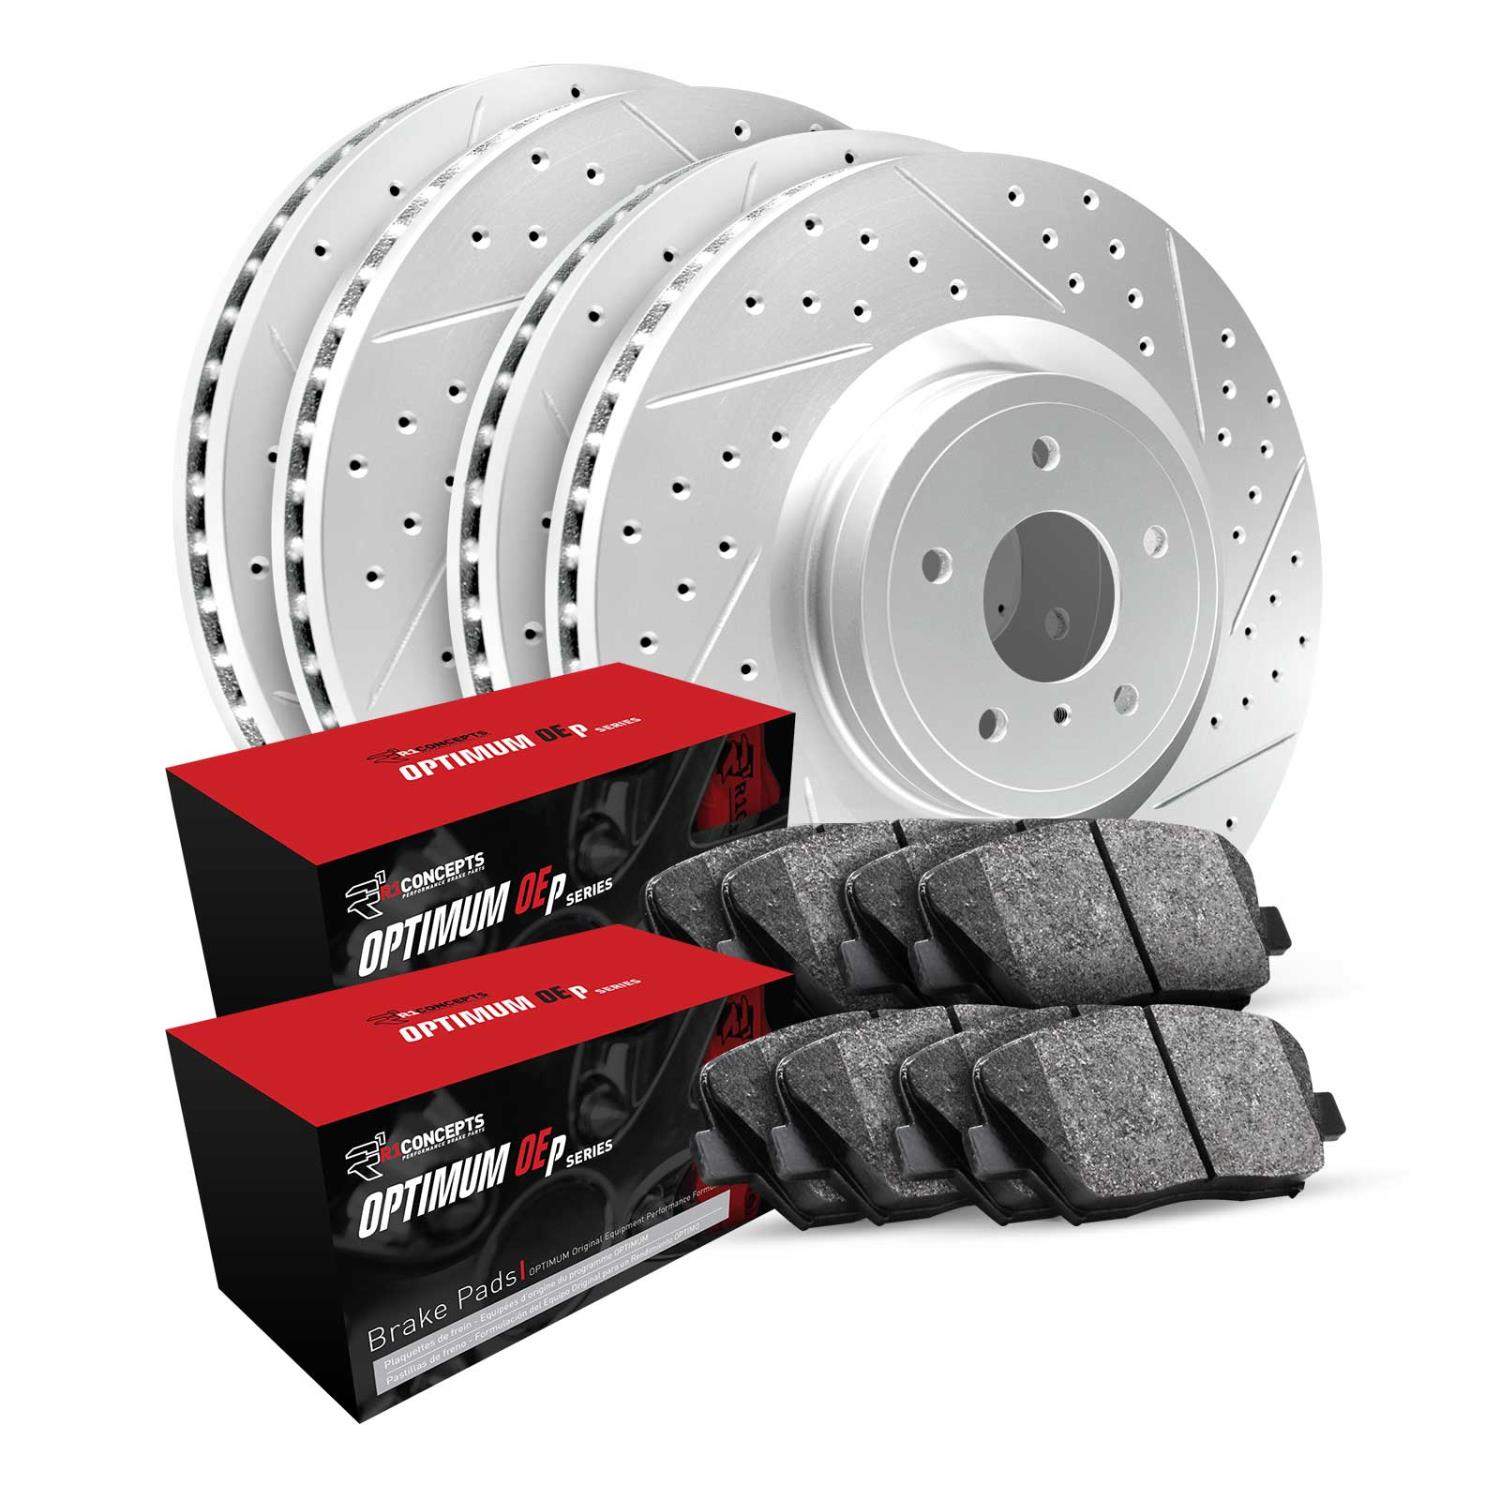 GEO-Carbon Drilled & Slotted Brake Rotor Set w/Optimum OE Pads, 2001-2004 Fits Multiple Makes/Models, Position: Rear